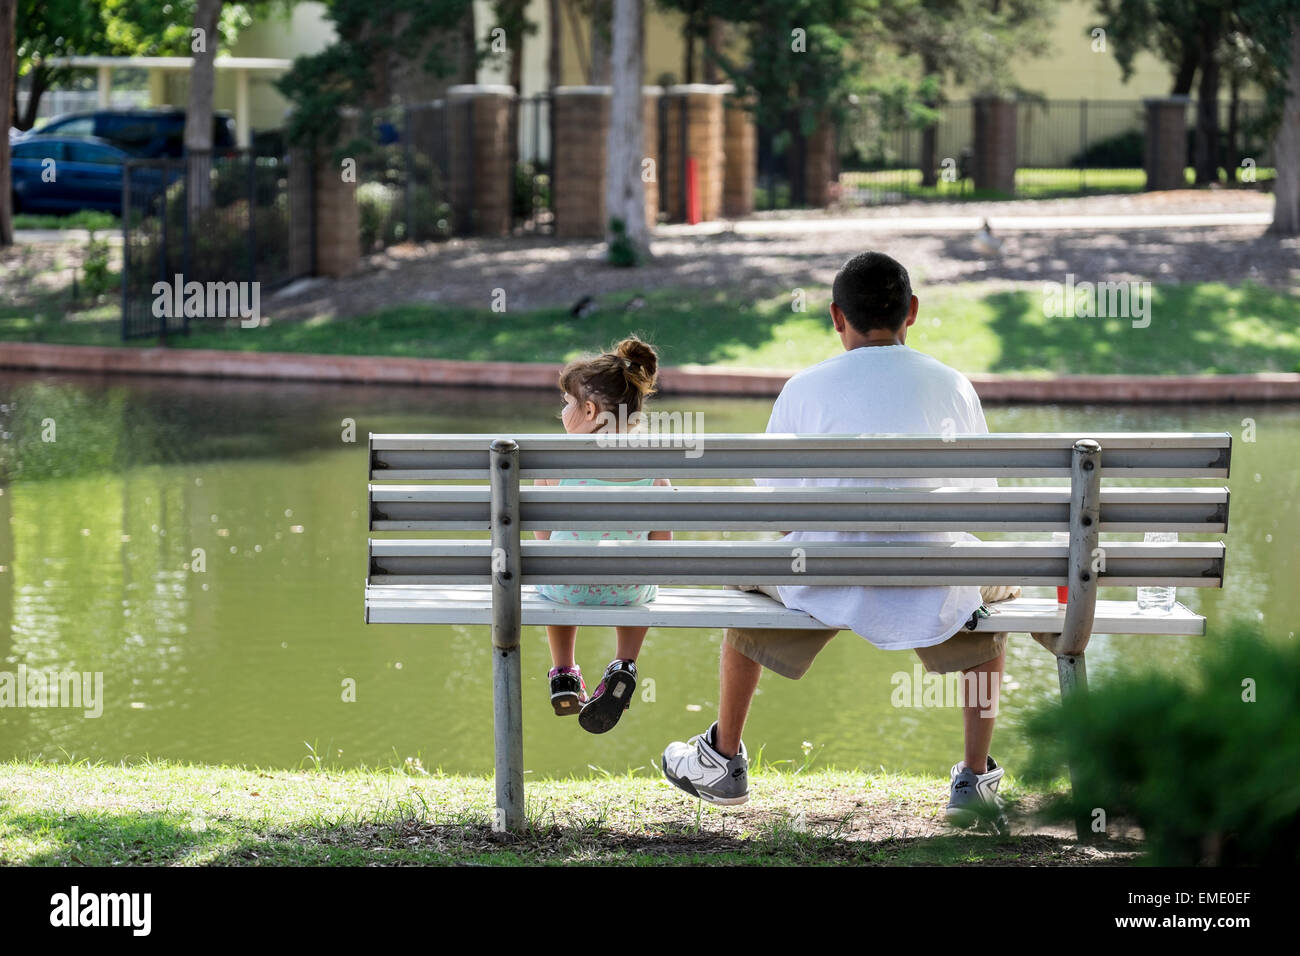 A Hispanic father and small daughter, sitting on a park bench, enjoy a spring day in a park. Oklahoma, USA. Stock Photo